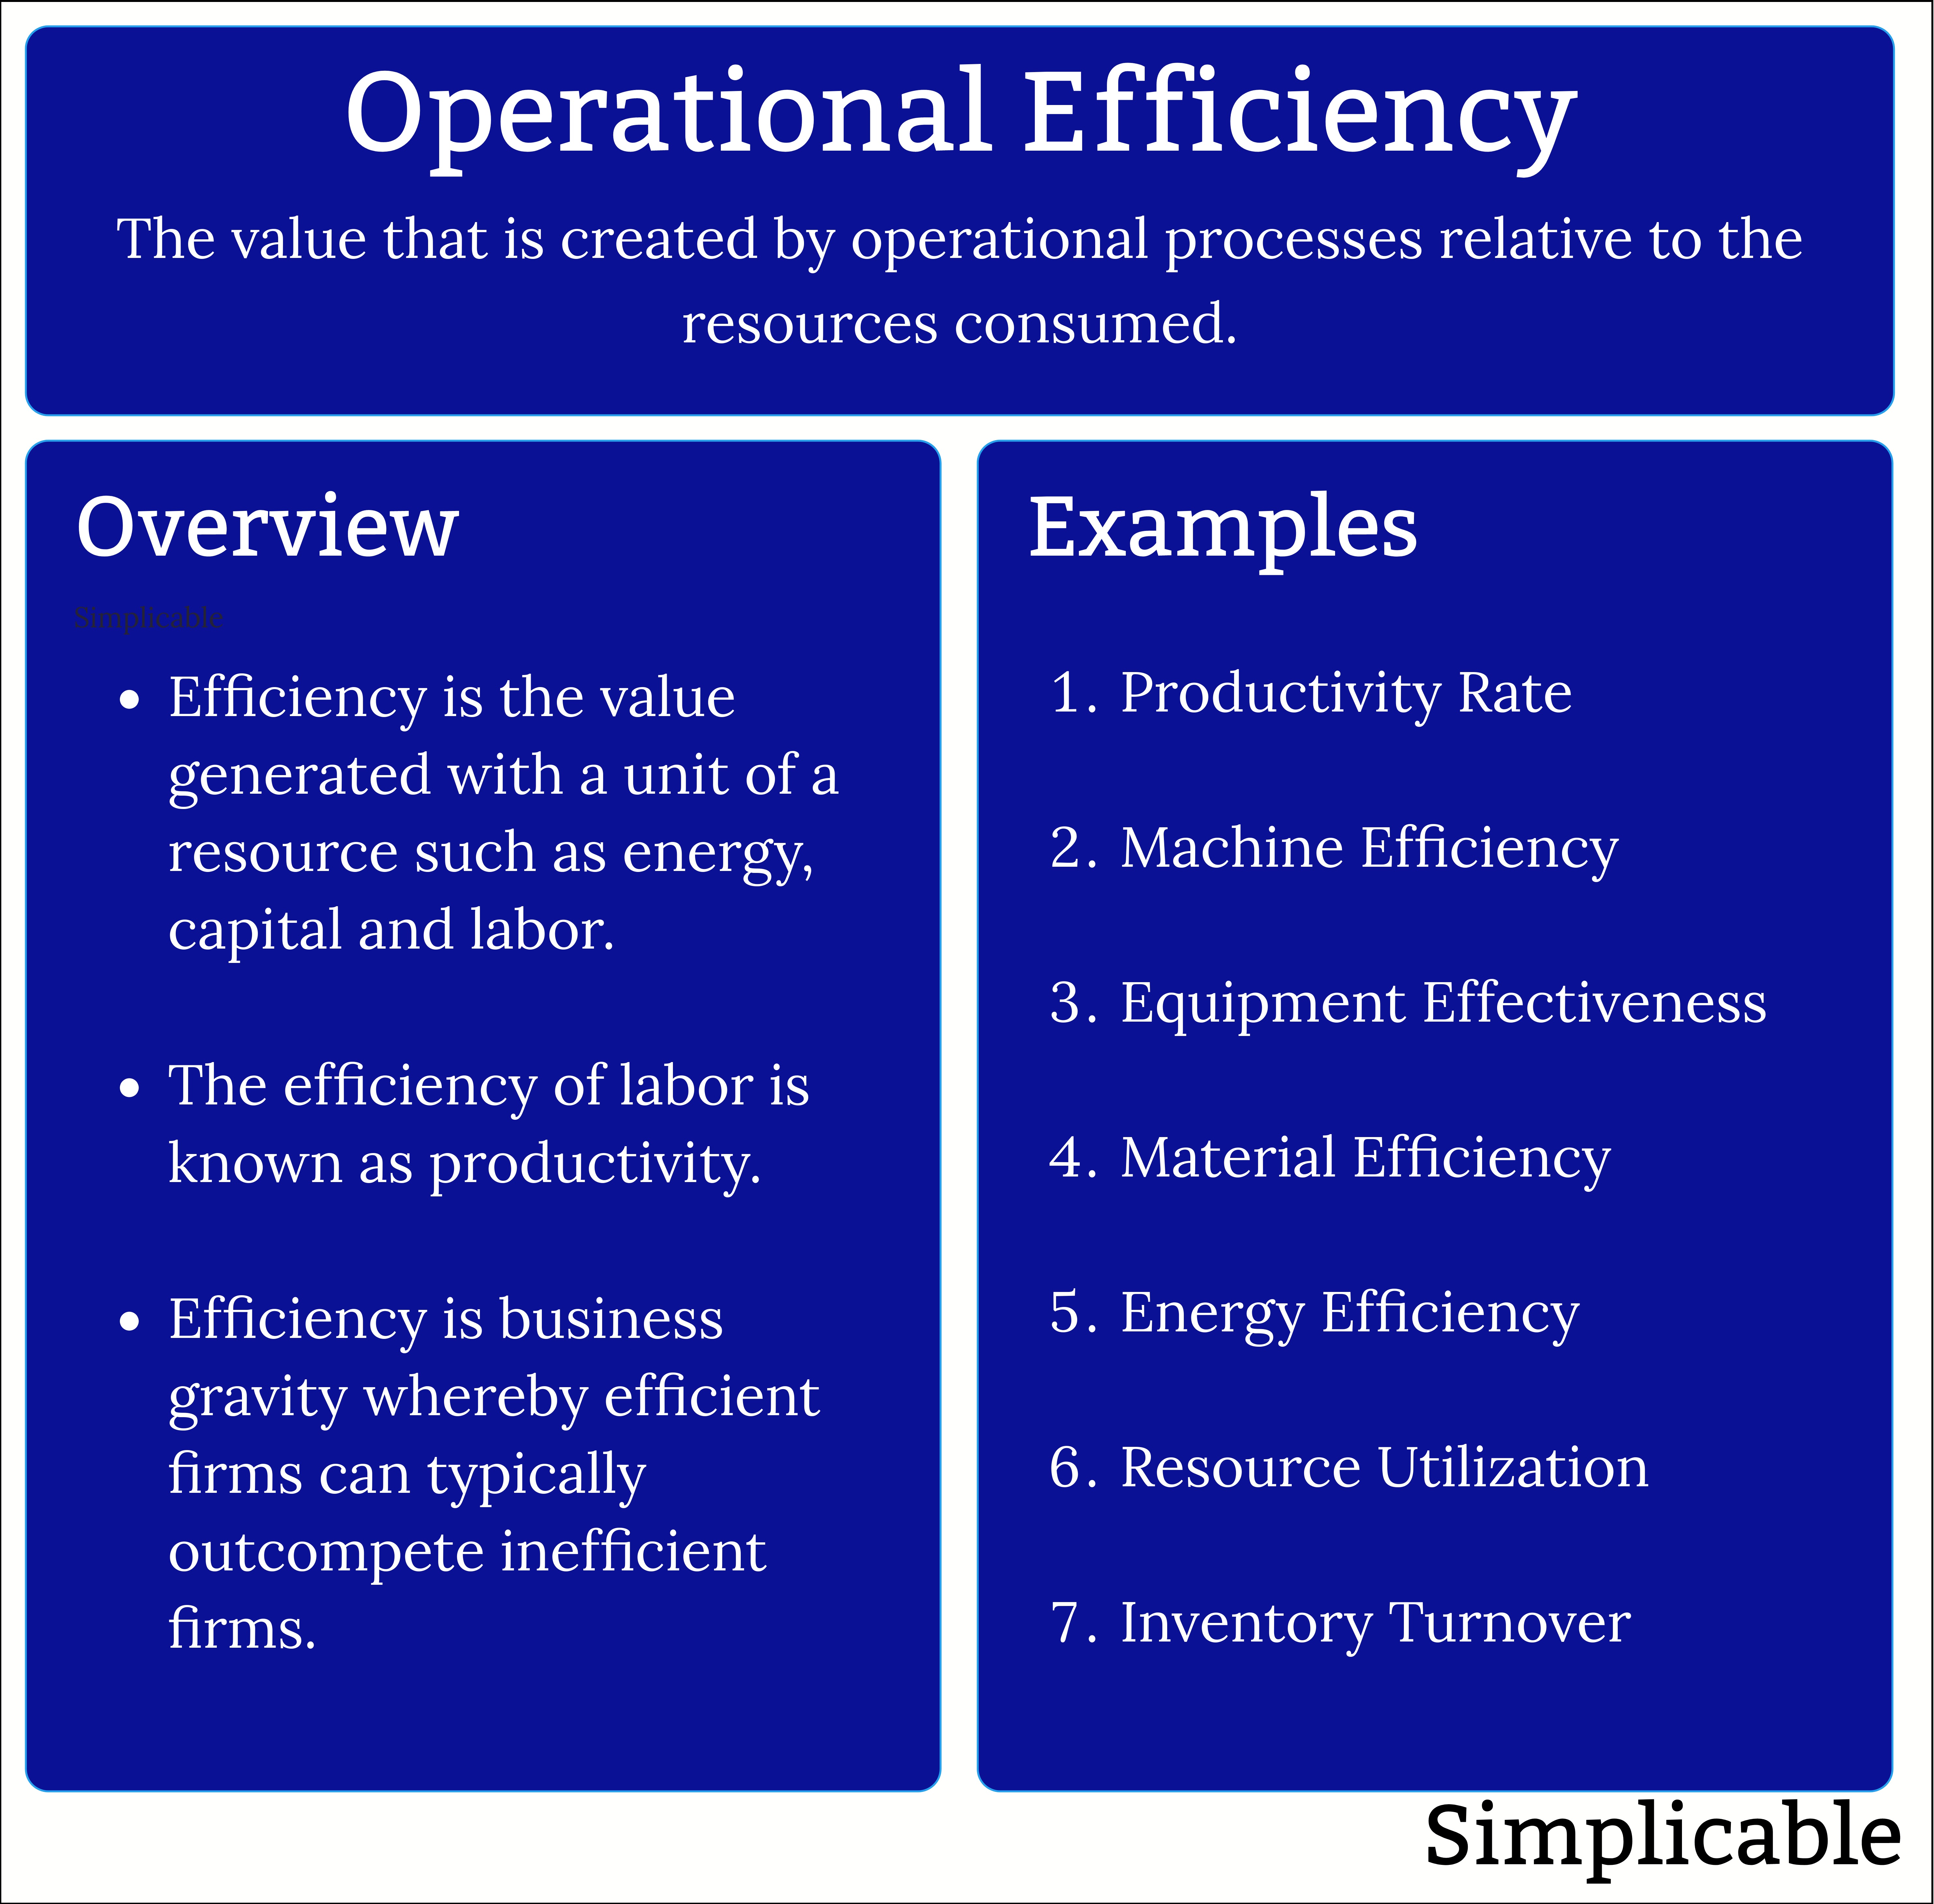 operational efficiency summary and examples